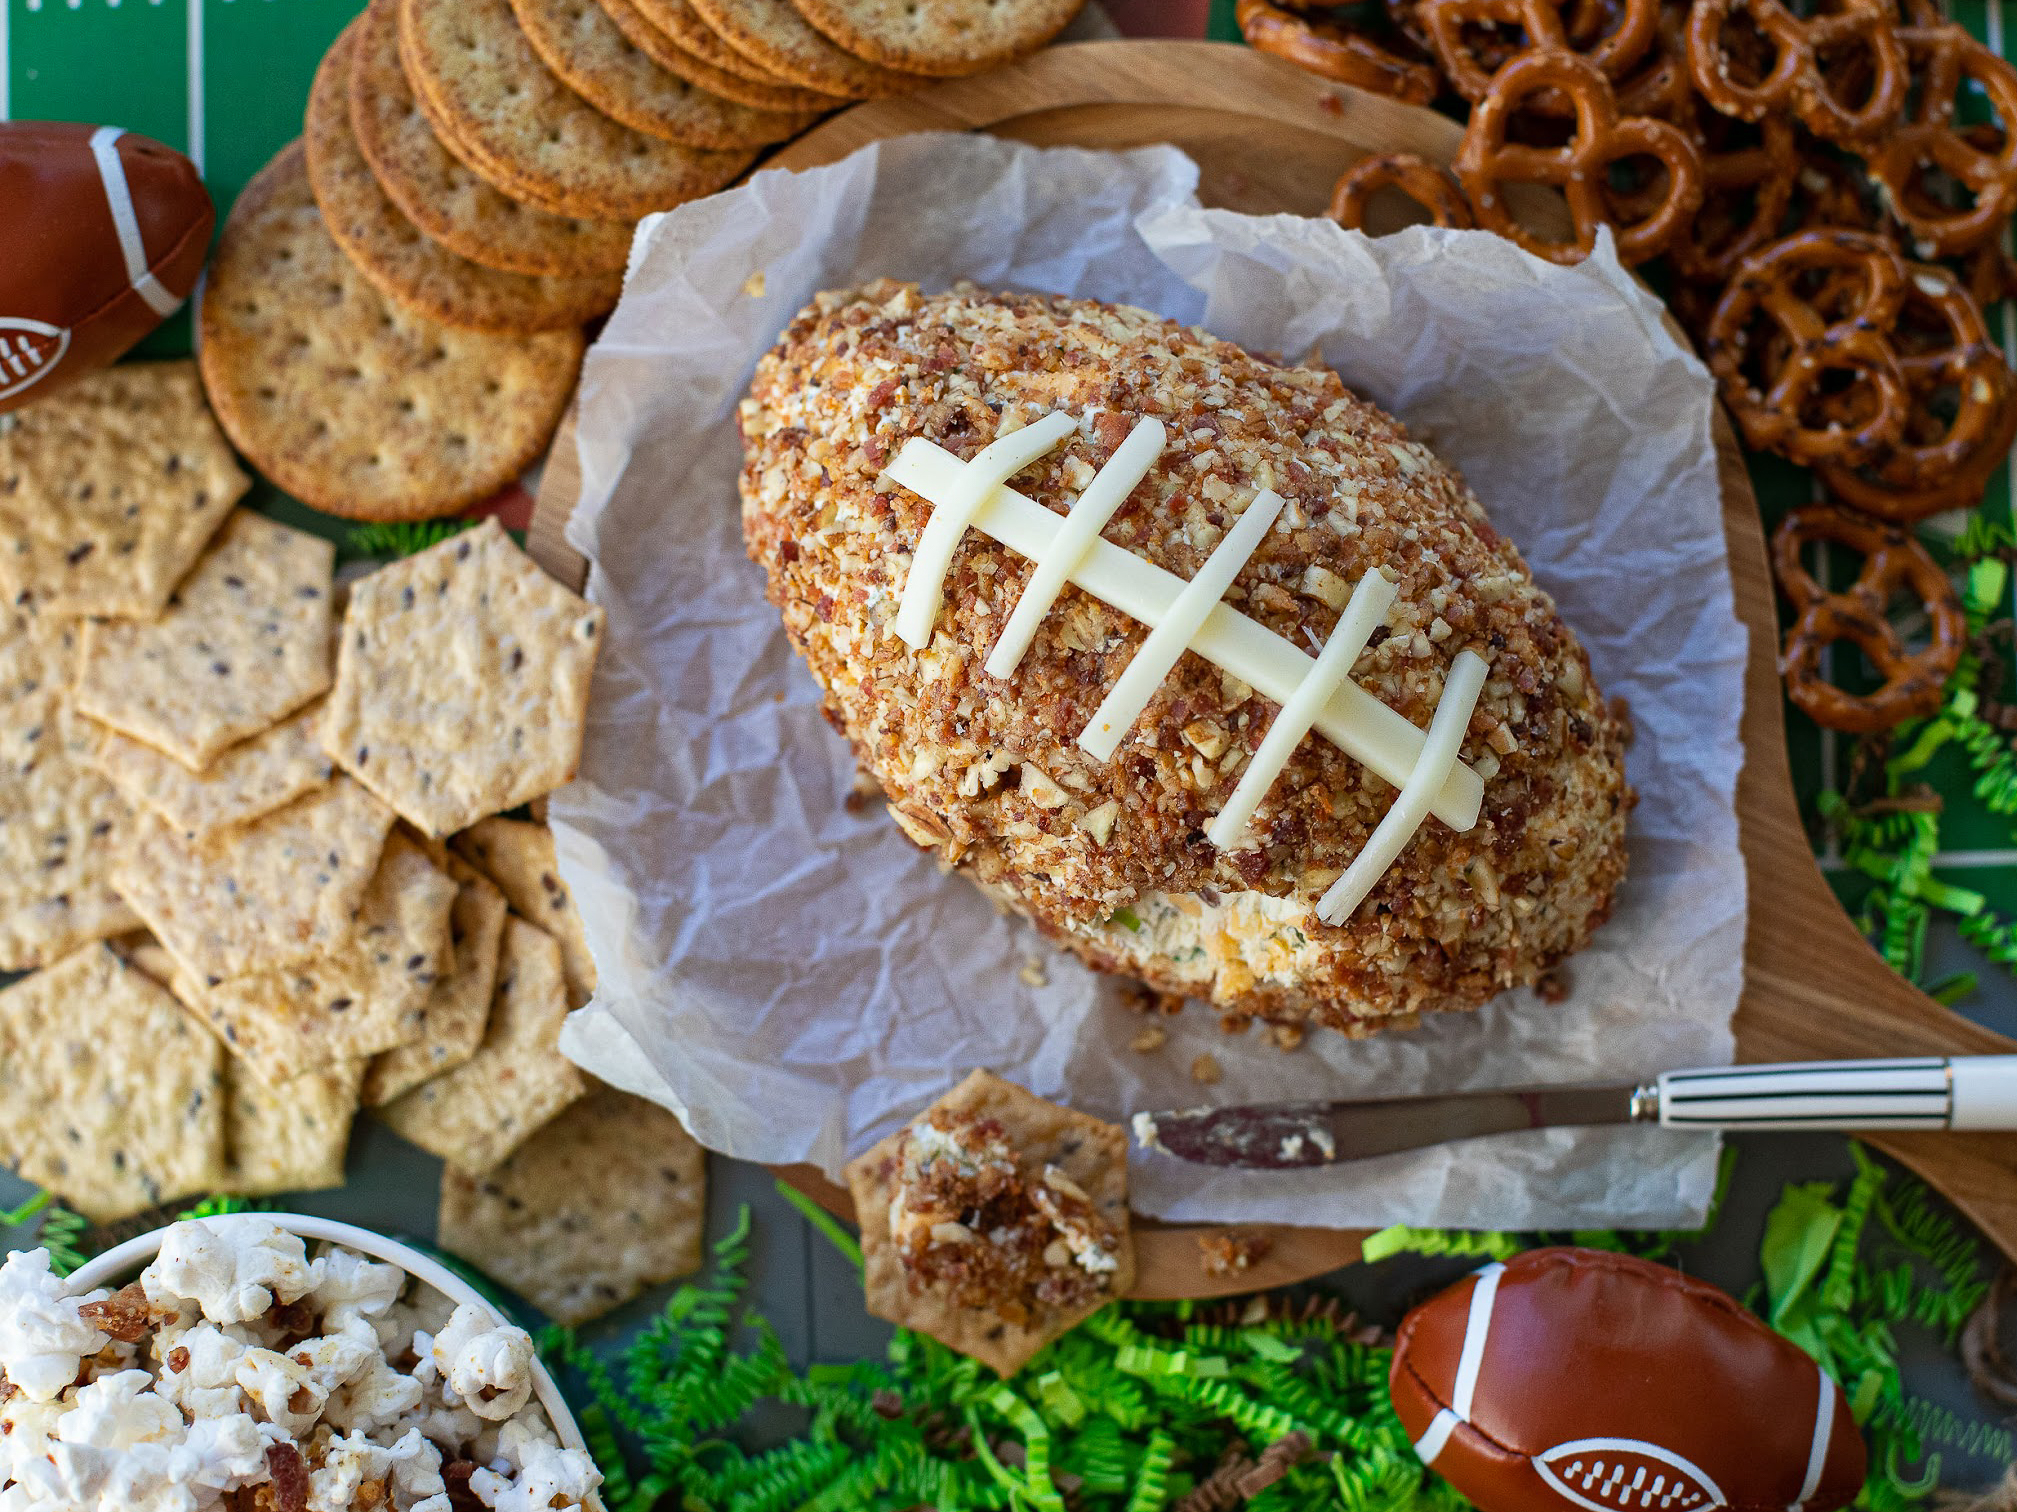 Grab Some Hatfield Bacon And Serve Up This Game Day Bacon Ranch Cheese Ball on I Heart Publix